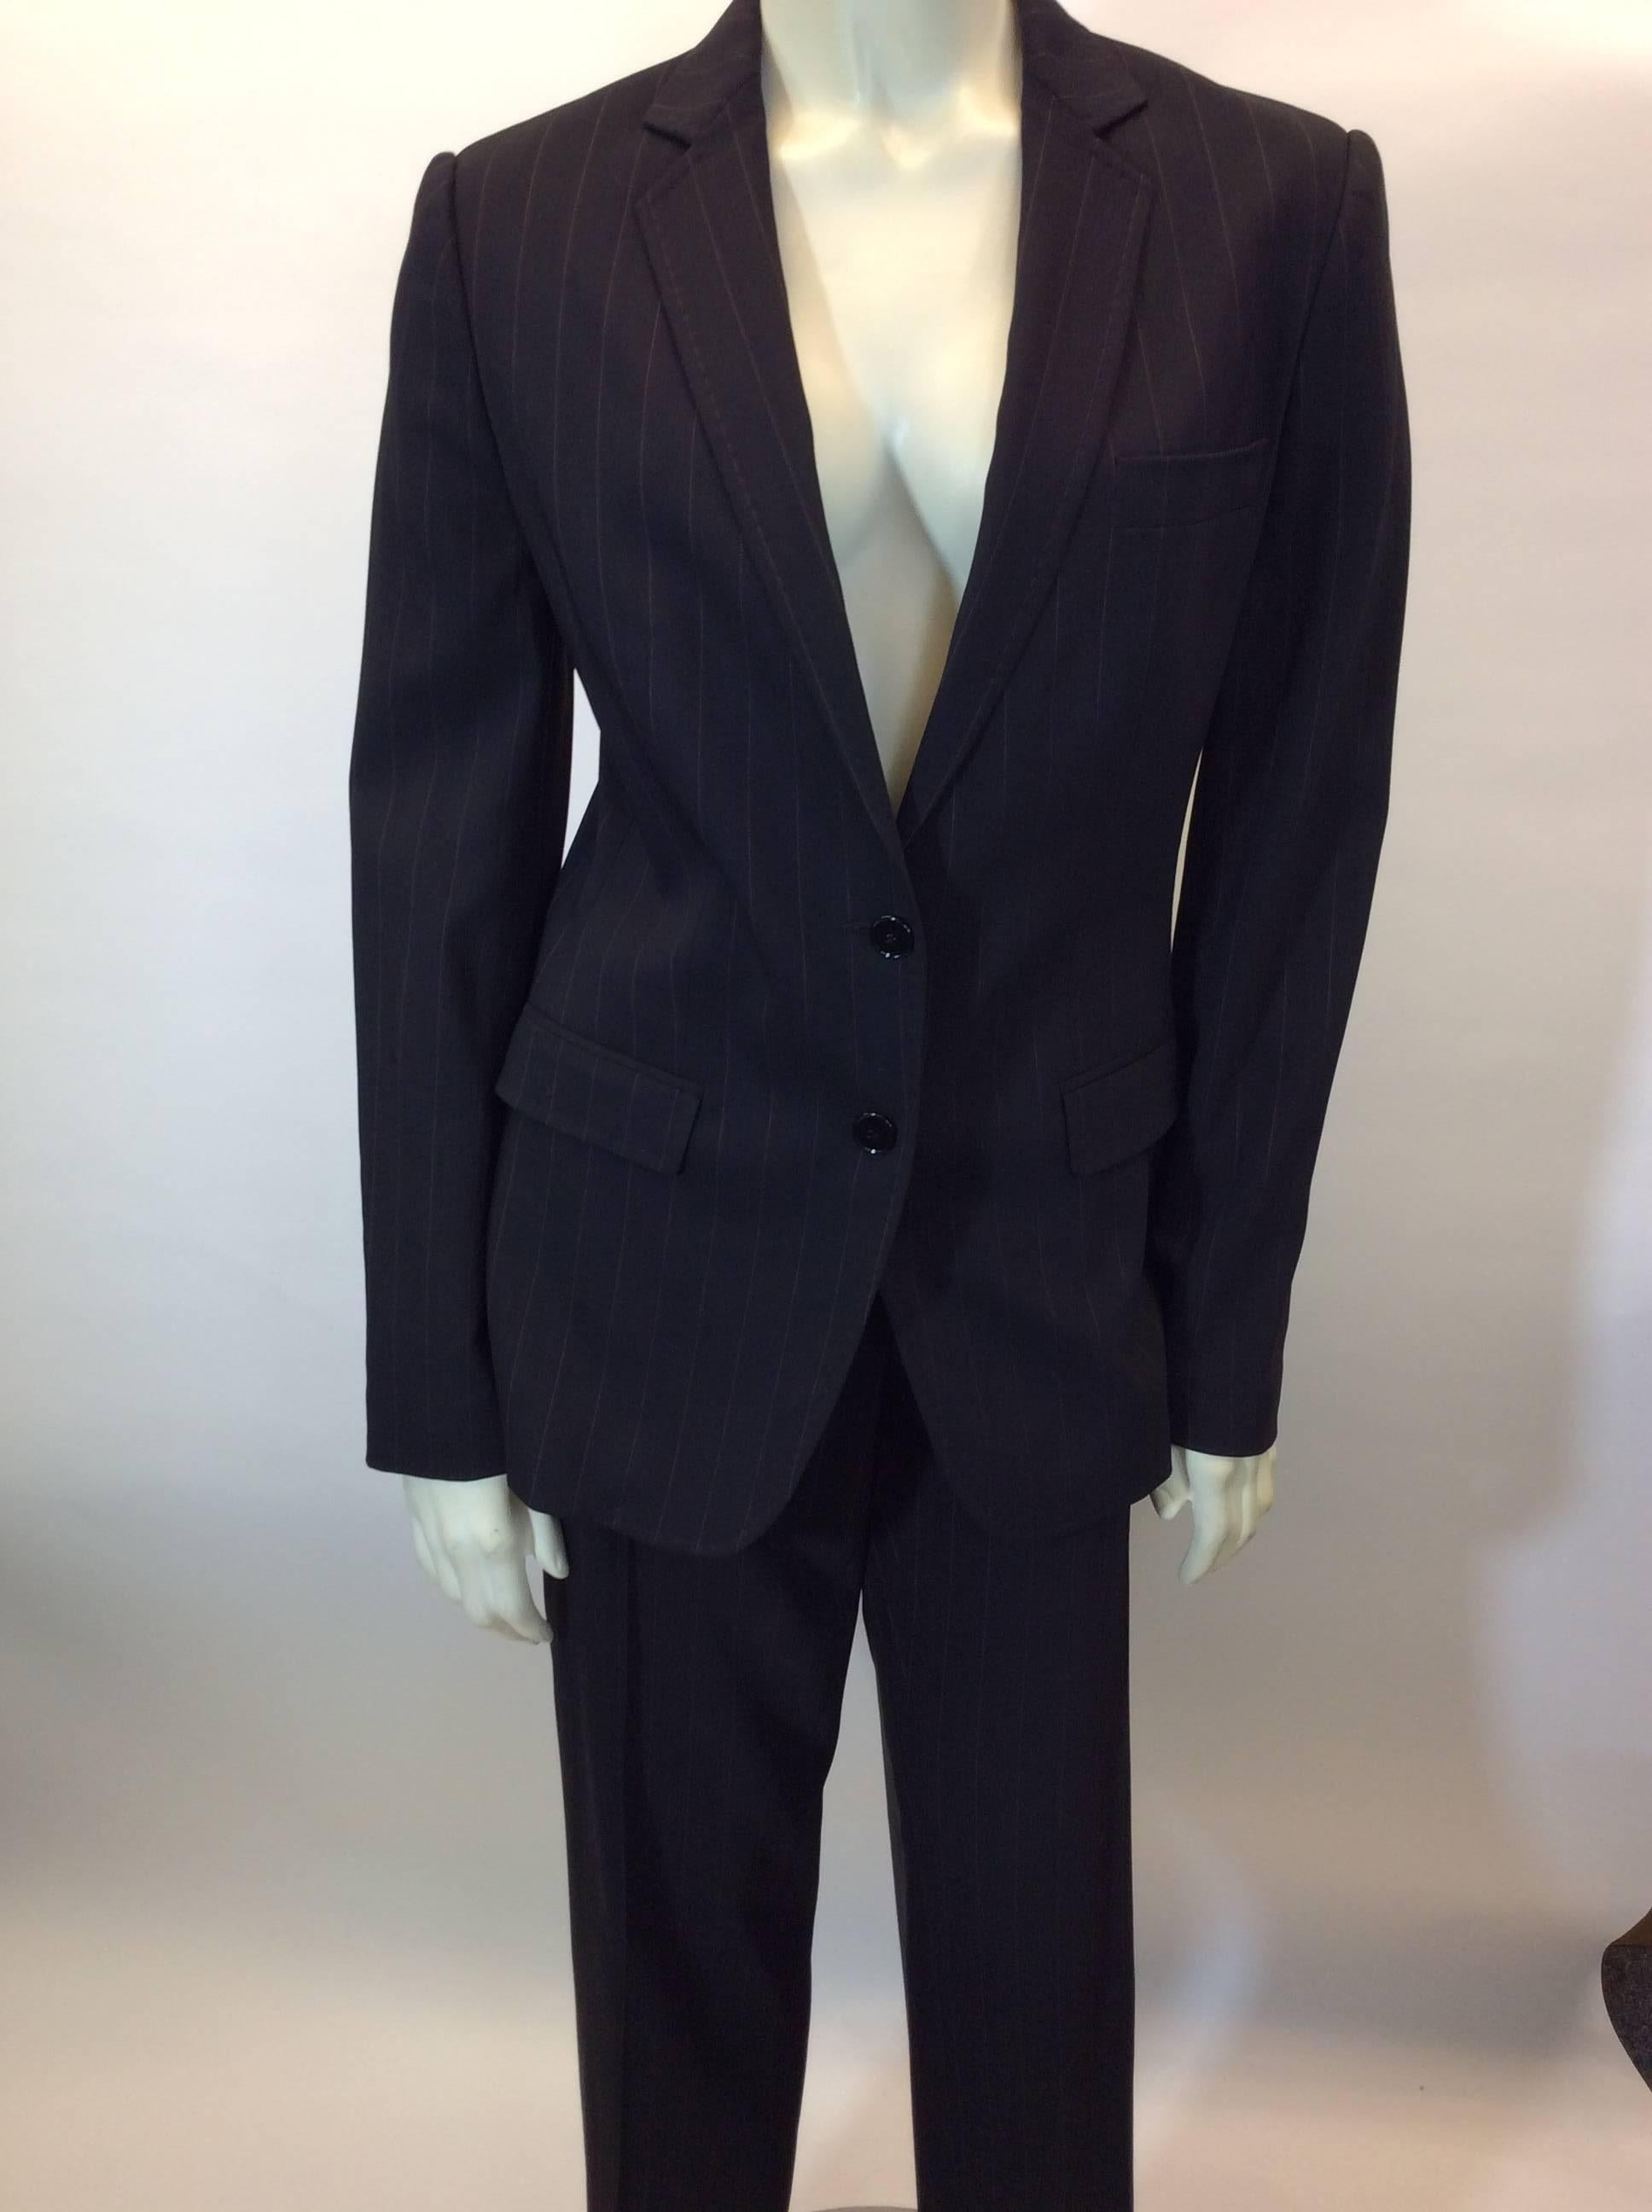 Black Pantsuit with Red Toned Pinstripes
Two button front closure on blazer
Blazer features two hip pockets and one chest pocket
Two hip pockets in pants
Full length straight leg trouser with cuff
Size 40
57% Wool, 40% Rayon, 1% Elastic, 2% Other